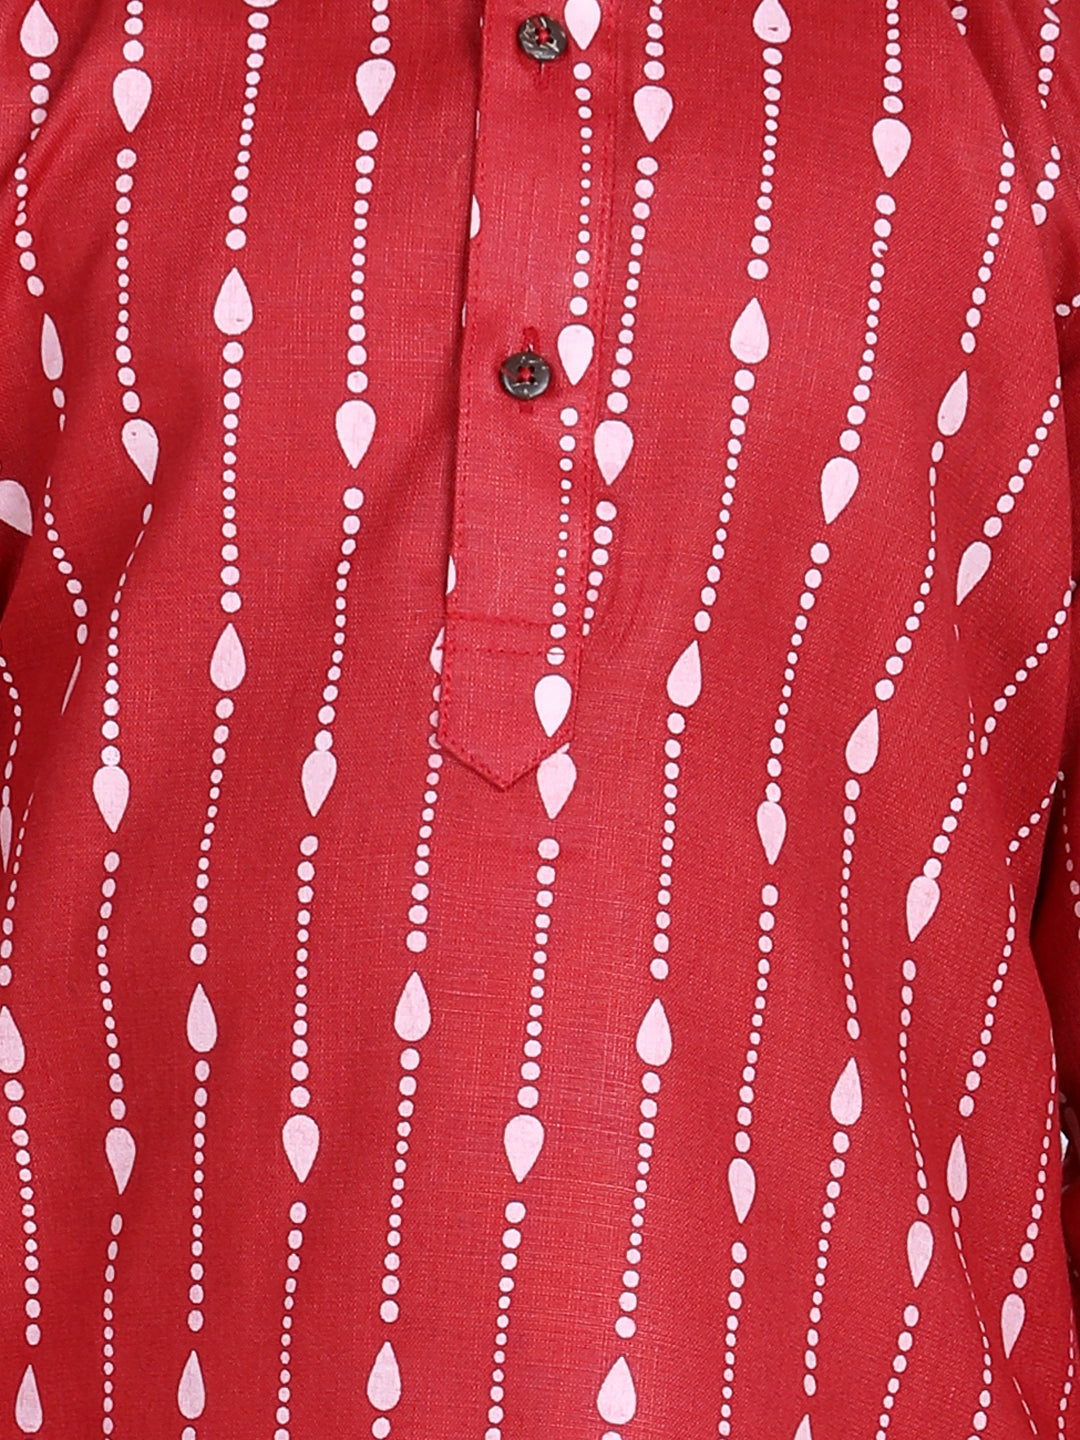 BownBee Printed Full Sleeves Dotted Lines Printed Kurta and Pajama Red